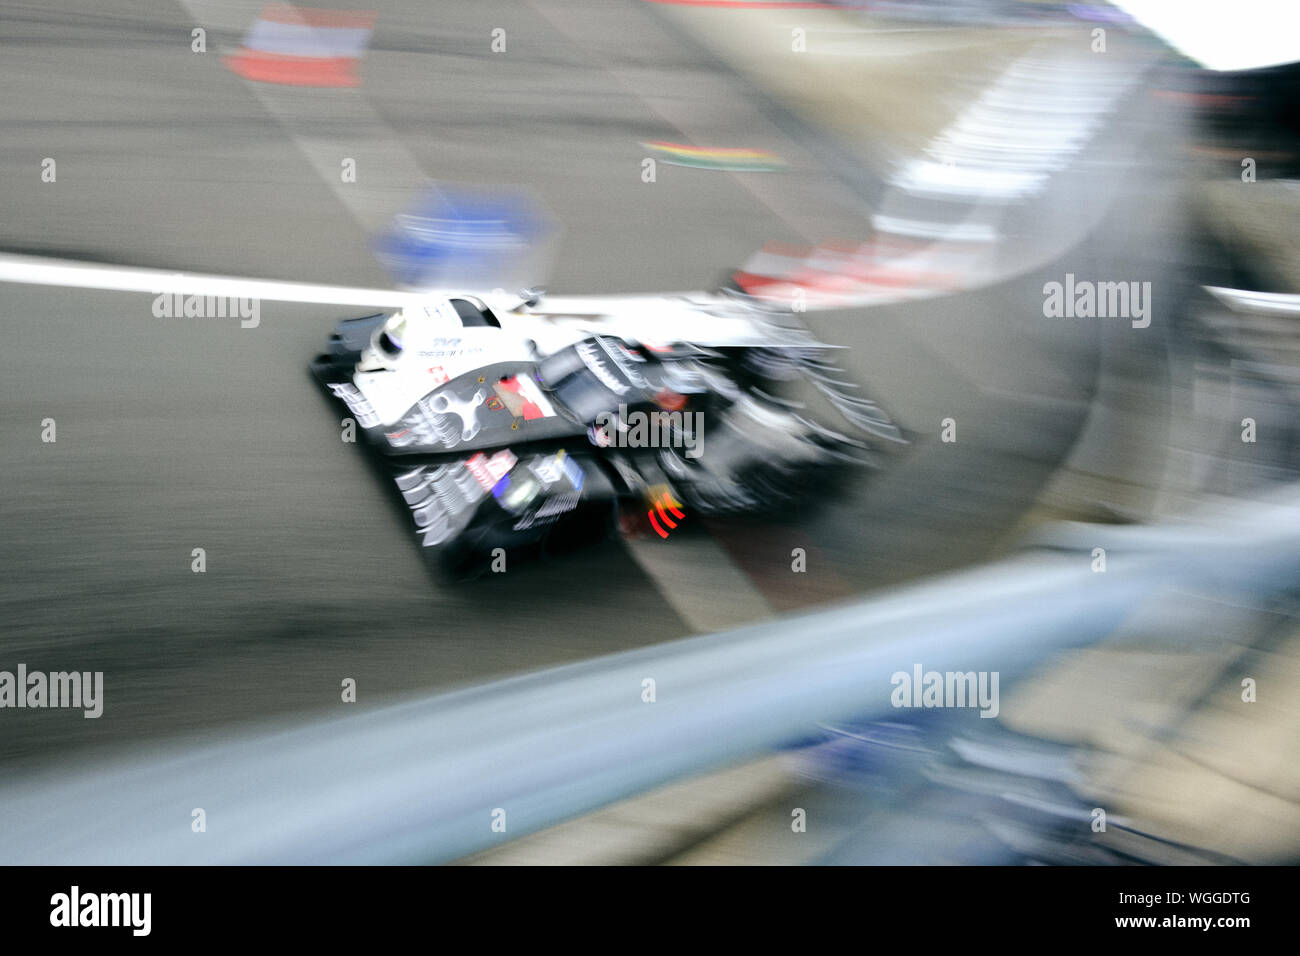 Towcester, Northamptonshire, UK. 1st September 2019. Rebellion racing (CHE) Rebellion R13 Gibson leaves the pit during the 2019 FIA 4 Hours of Silverstone World Endurance Championship at Silverstone Circuit. Photo by Gergo Toth / Alamy Live News Stock Photo